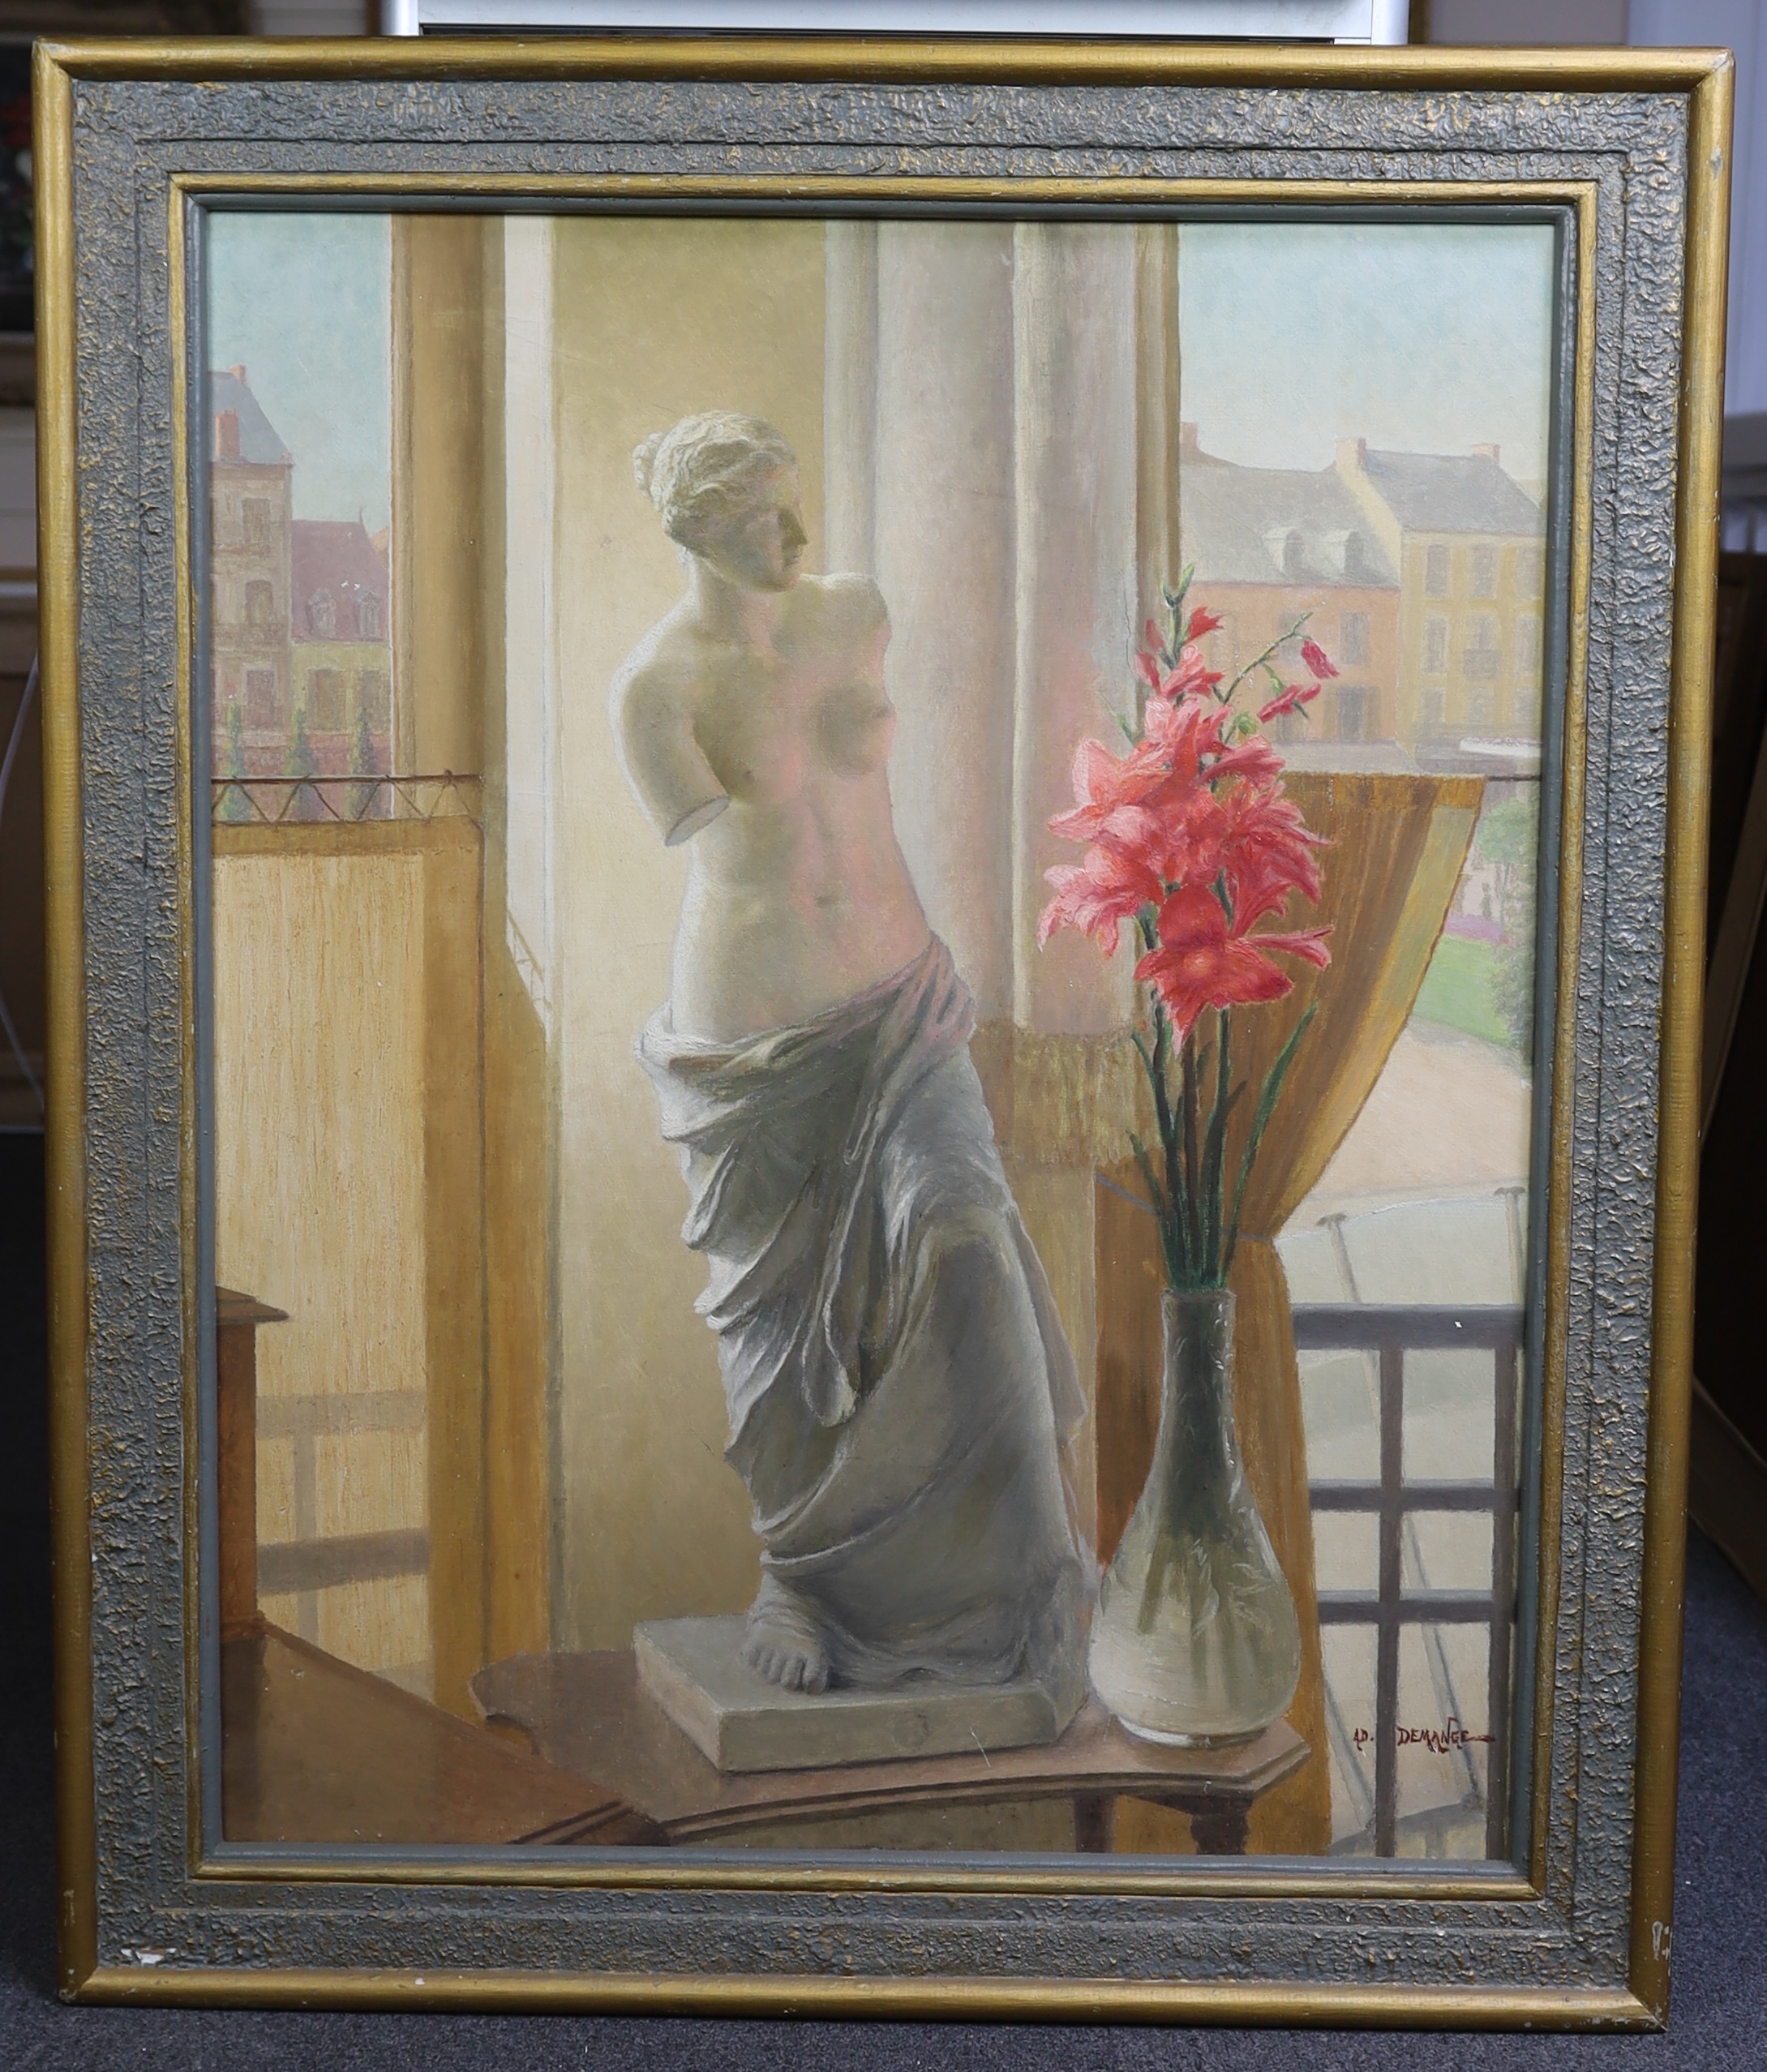 Adolphe Demange (French, 1857-1928), oil on canvas, 'Venus de Milo sculpture and gladioli in the window', signed, 97 x 77cm. Condition - good